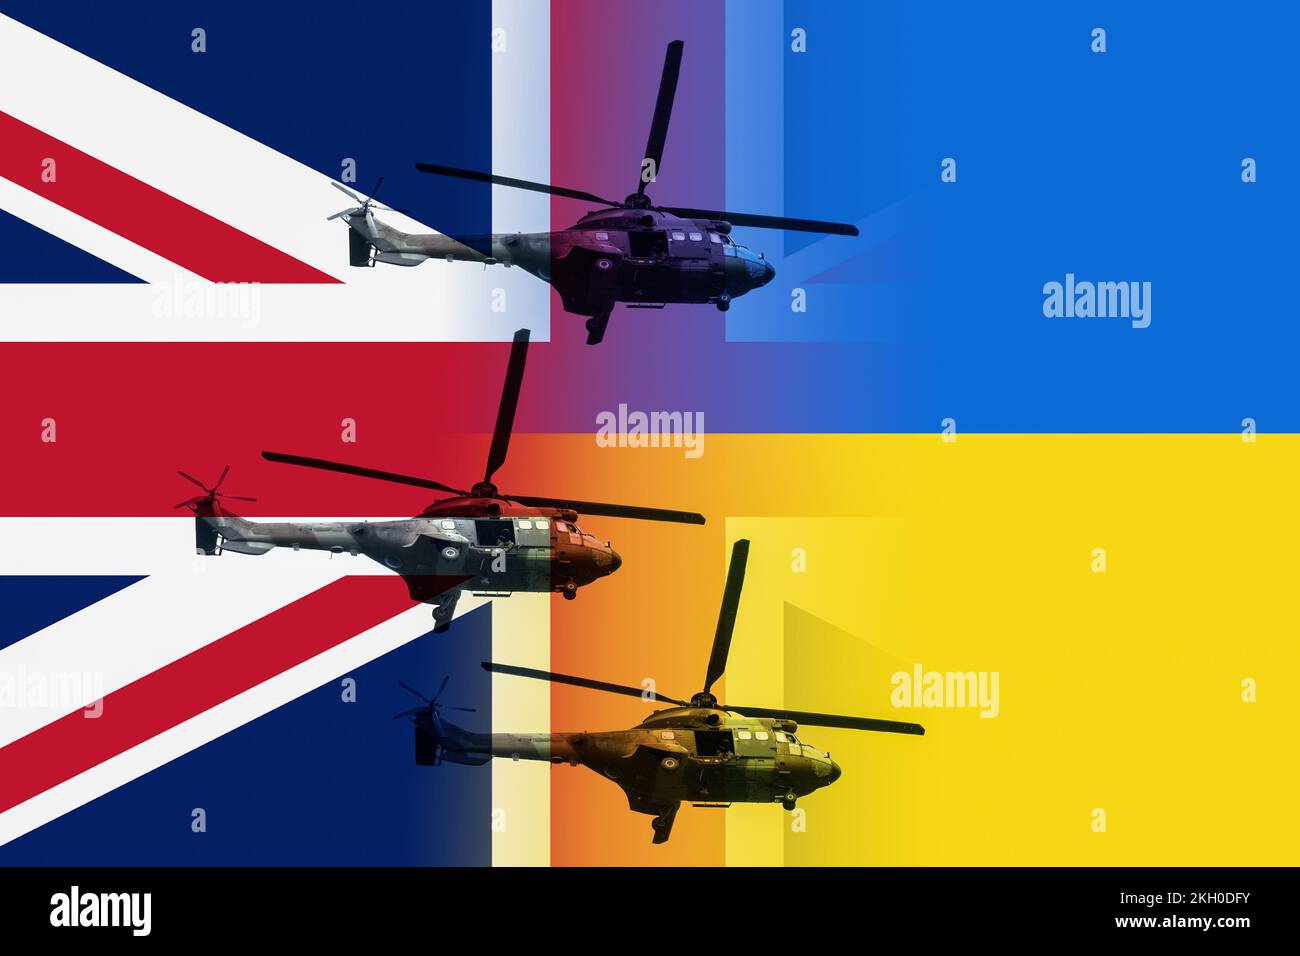 Military helicopters on UK and Ukraine flags. Arms to Ukraine... concept Stock Photo